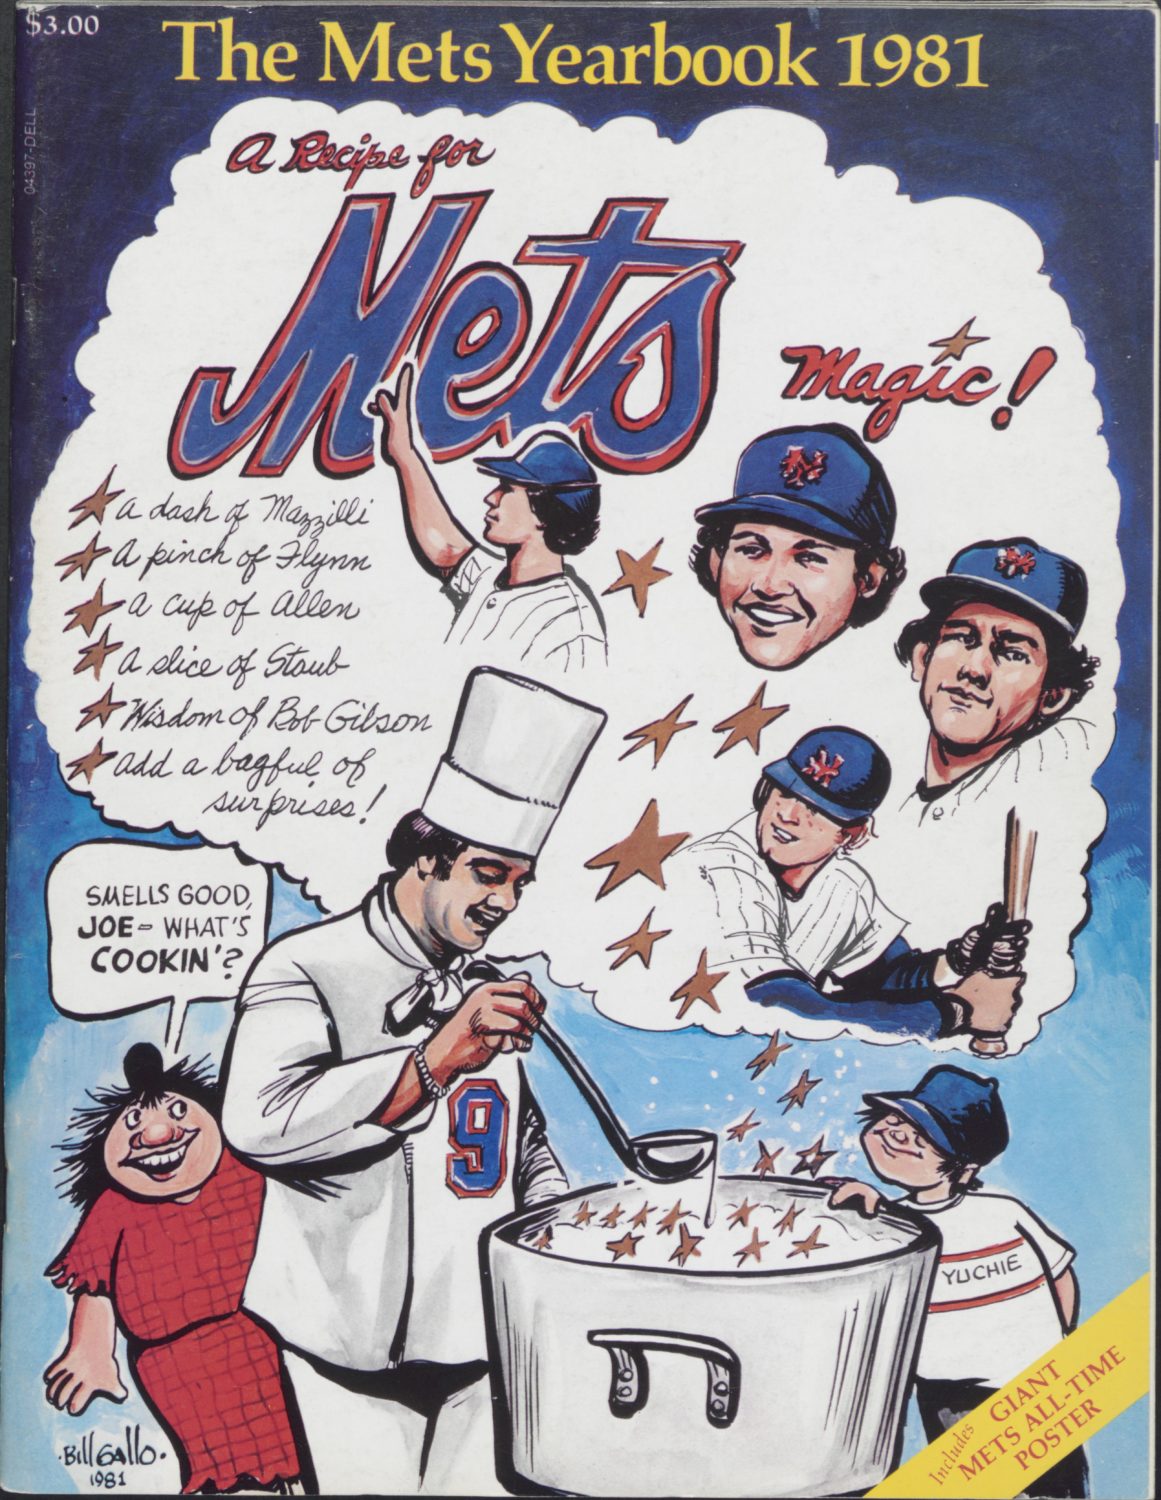 1981 Mets Yearbook Featuring Recipe for Mets Magic